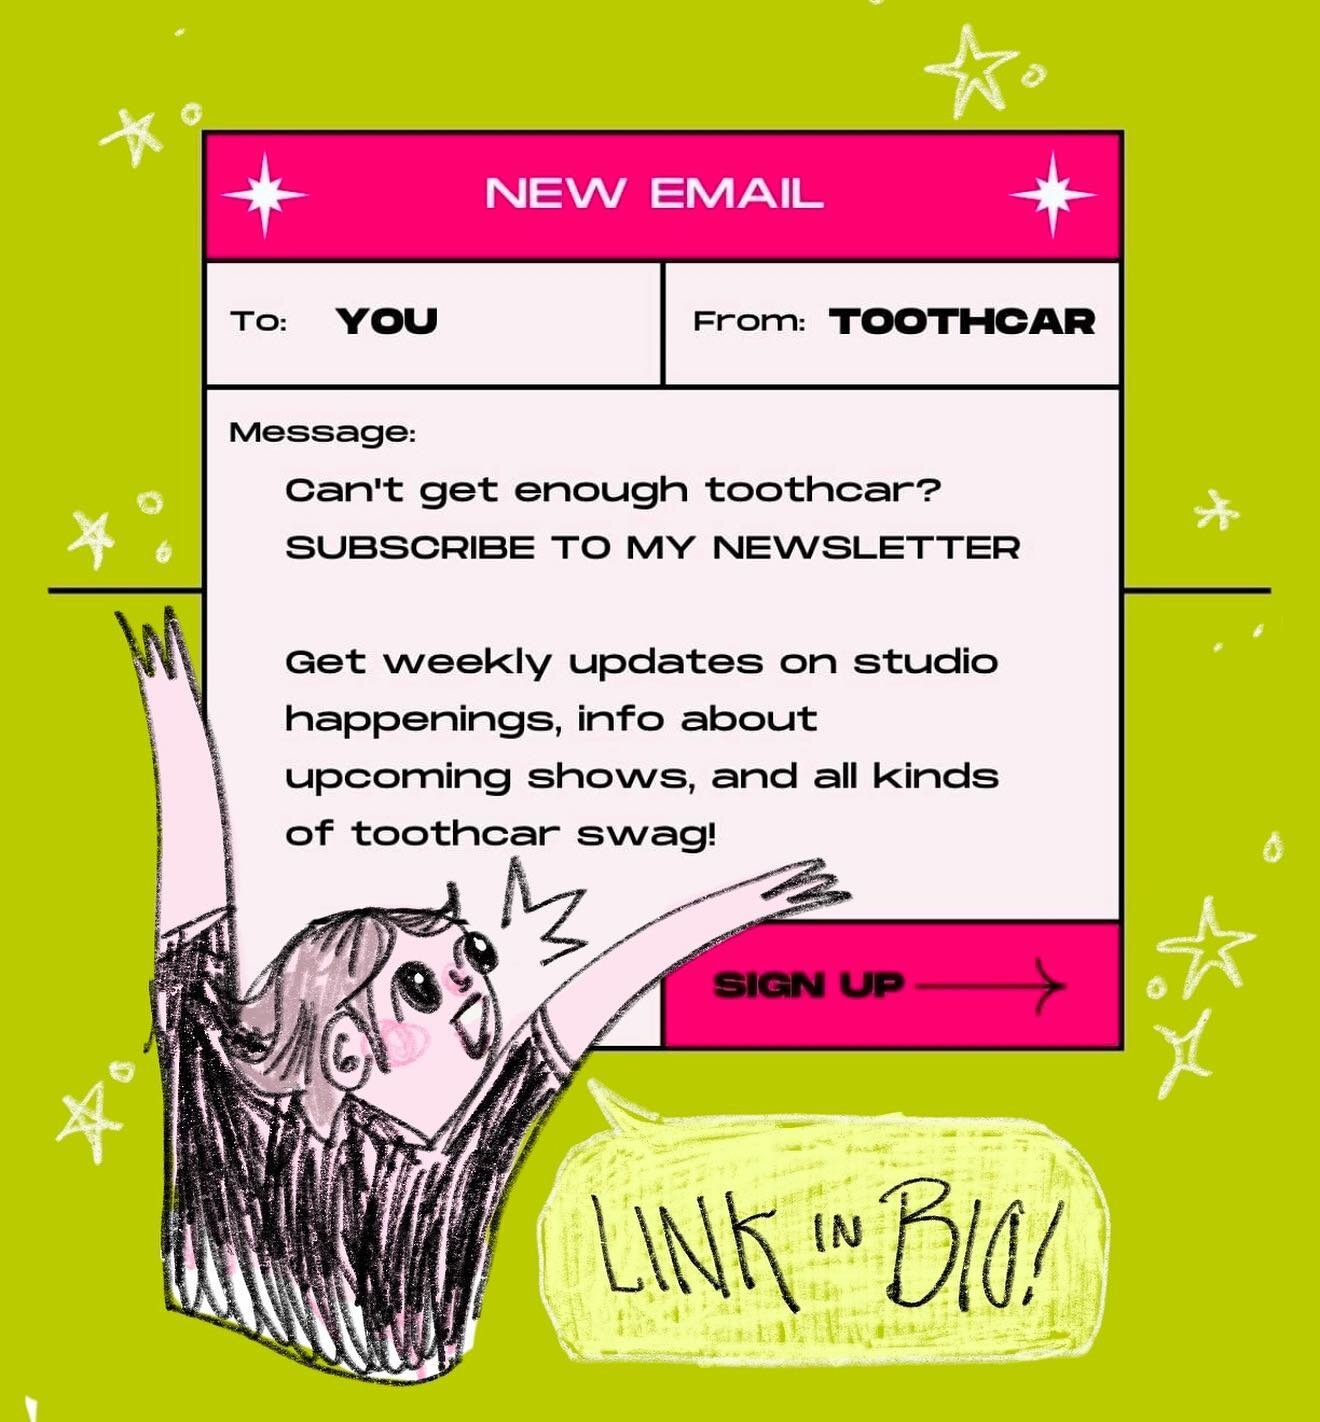 HAPPY TOOTHCAR TUESDAY!! 

Sign up to receive weekly emails from yours truly! Be the first to hear about upcoming shows, get sneak peeks of my studio life, and get discounts on Toothcar swag!!

👾🕺👾